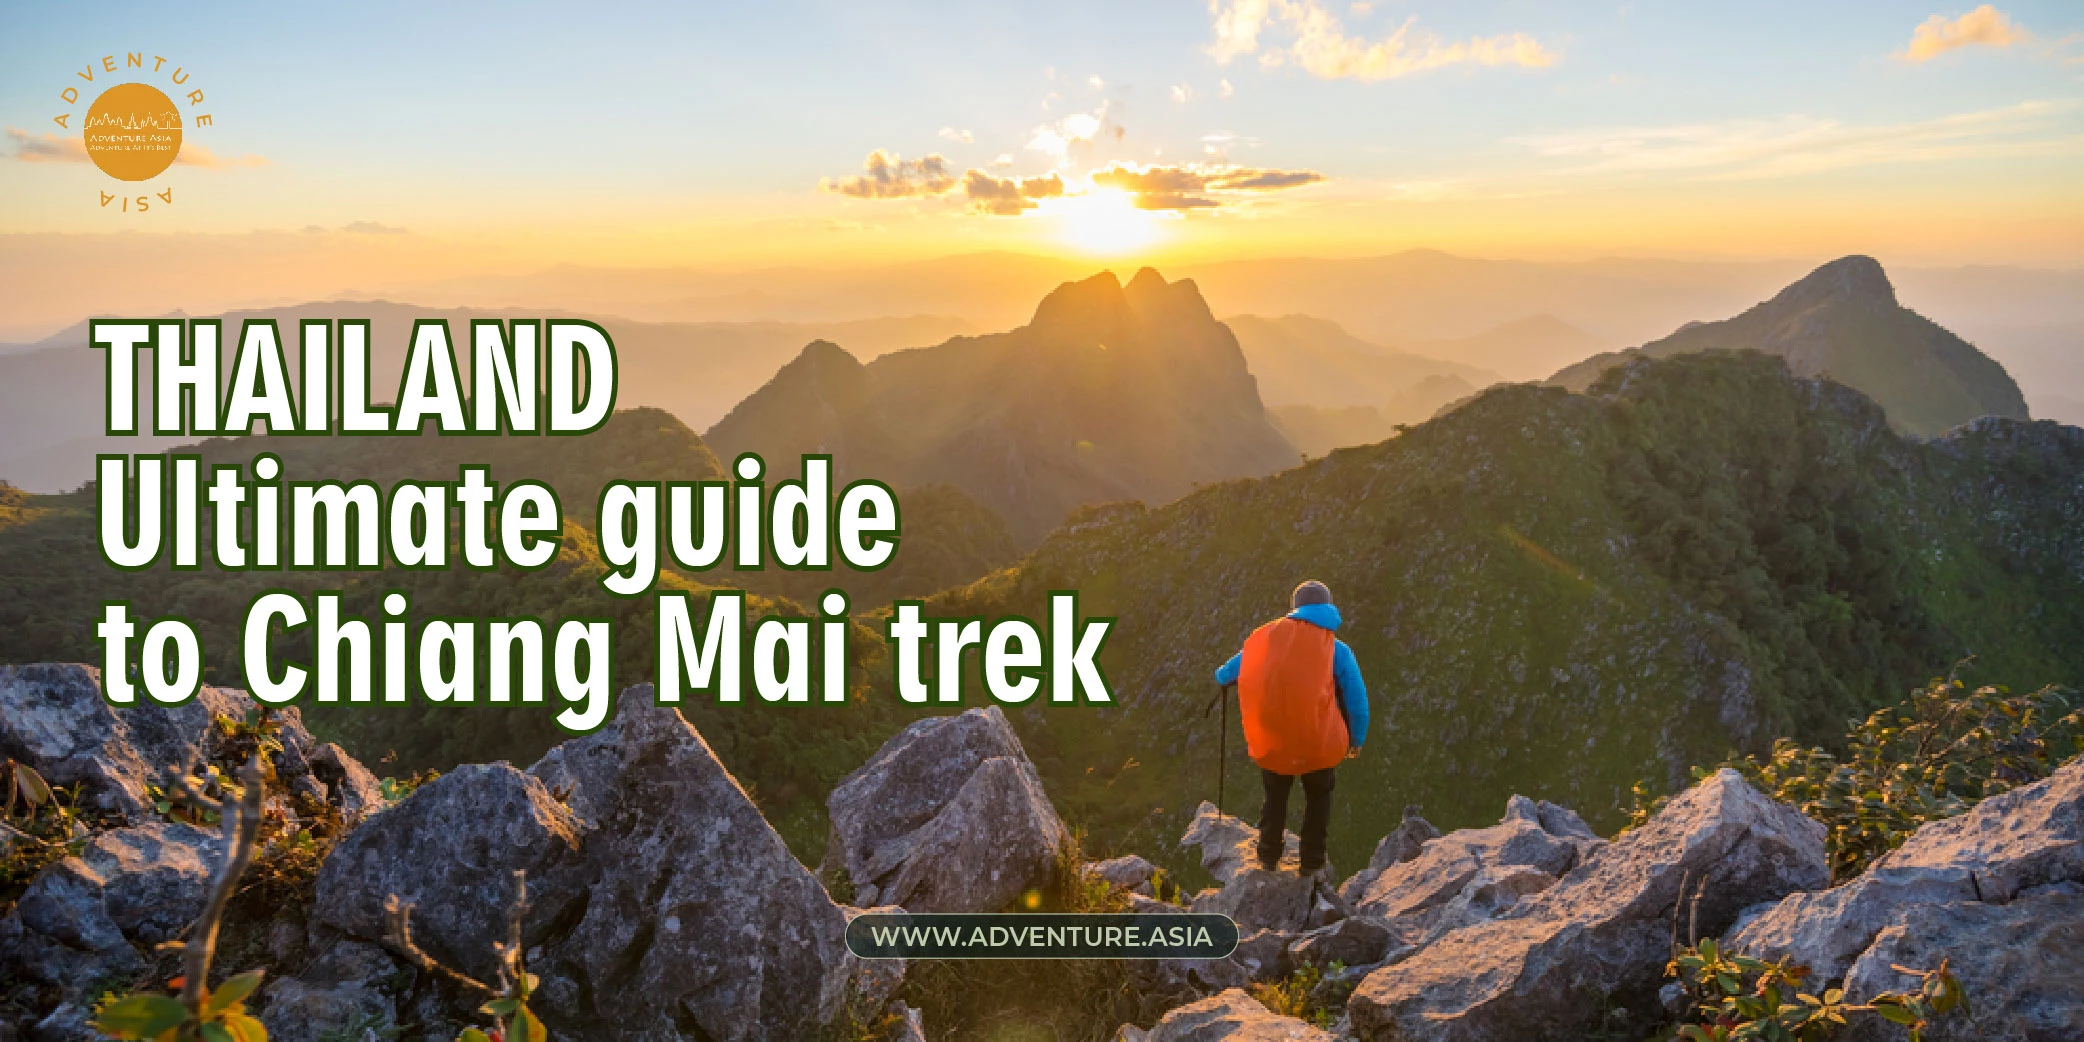 The Beauty of Northern Thailand: Ultimate Guide to Trekking Chiang Mai Thailand